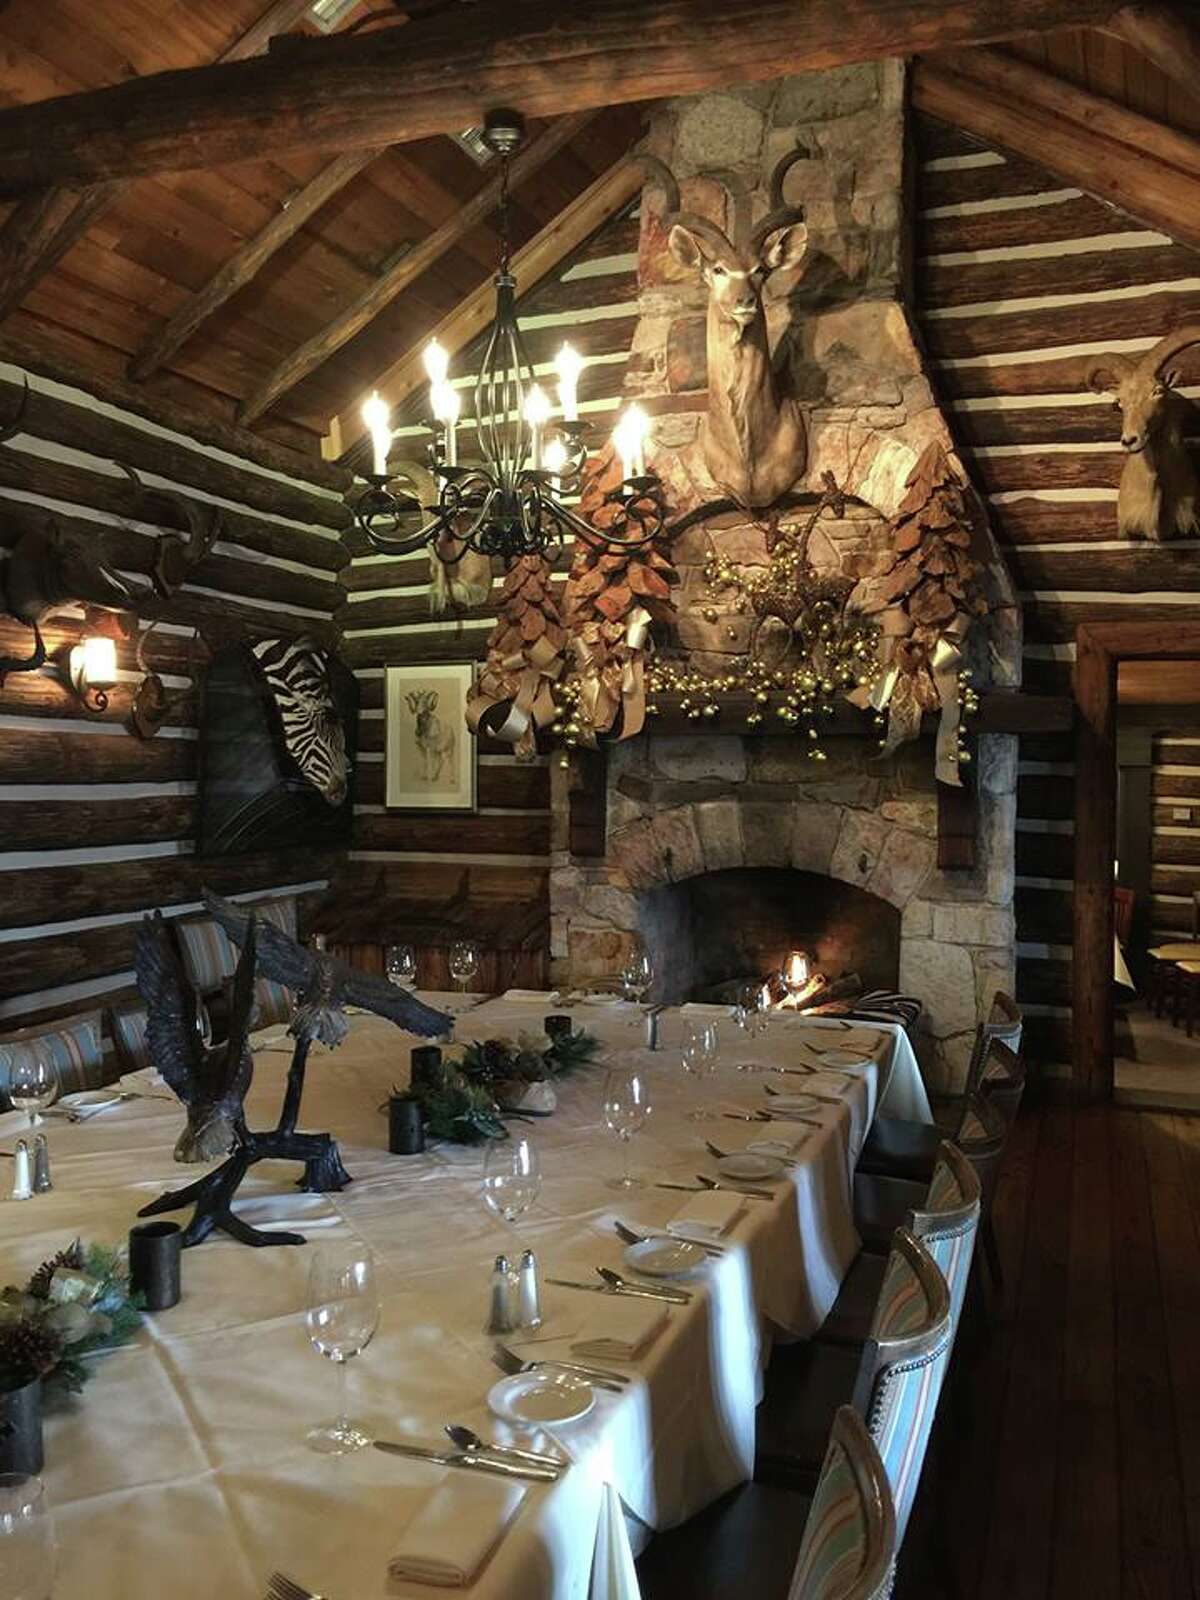 One of the main dining rooms at Rainbow Lodge.